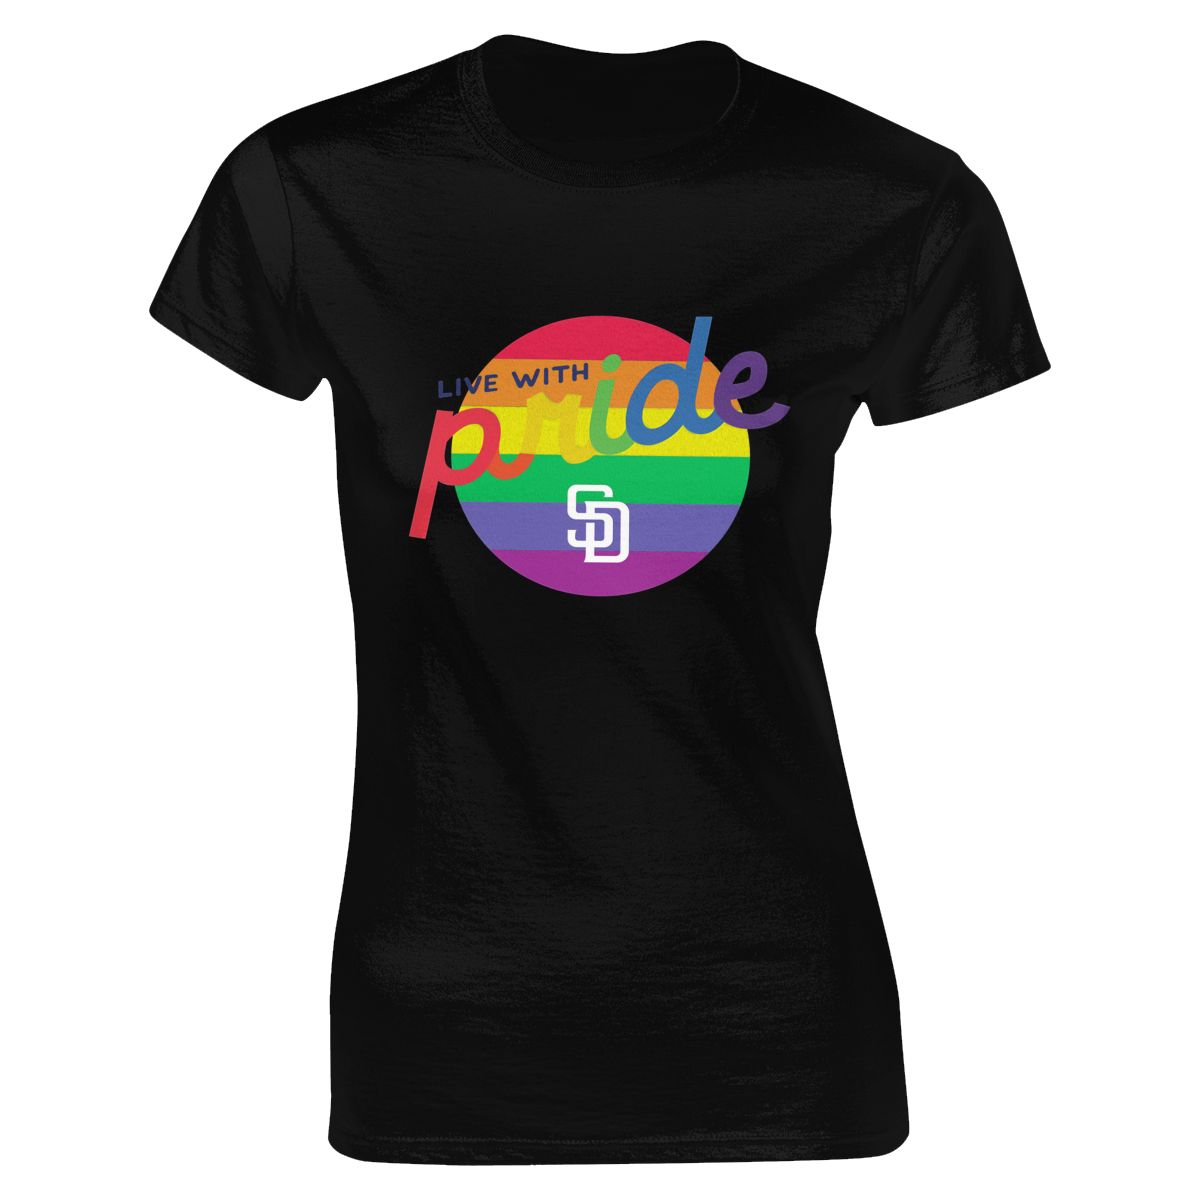 San Diego Padres Round LGBT Lettering Women's Classic-Fit T-Shirt